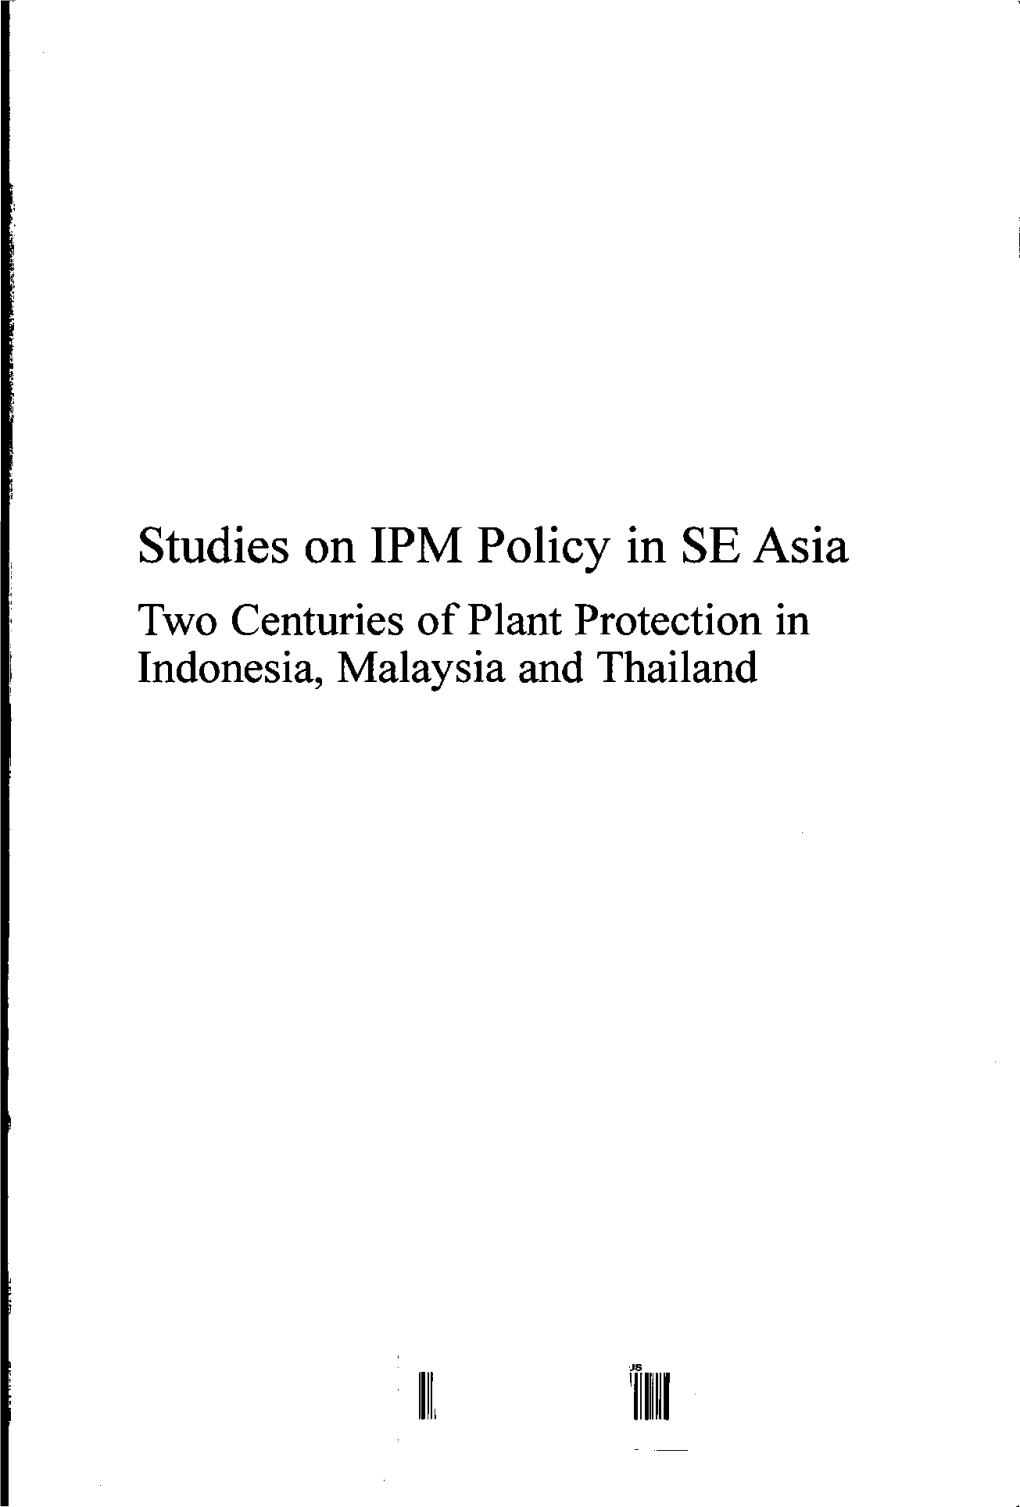 Studies on IPM Policy in SE Asia